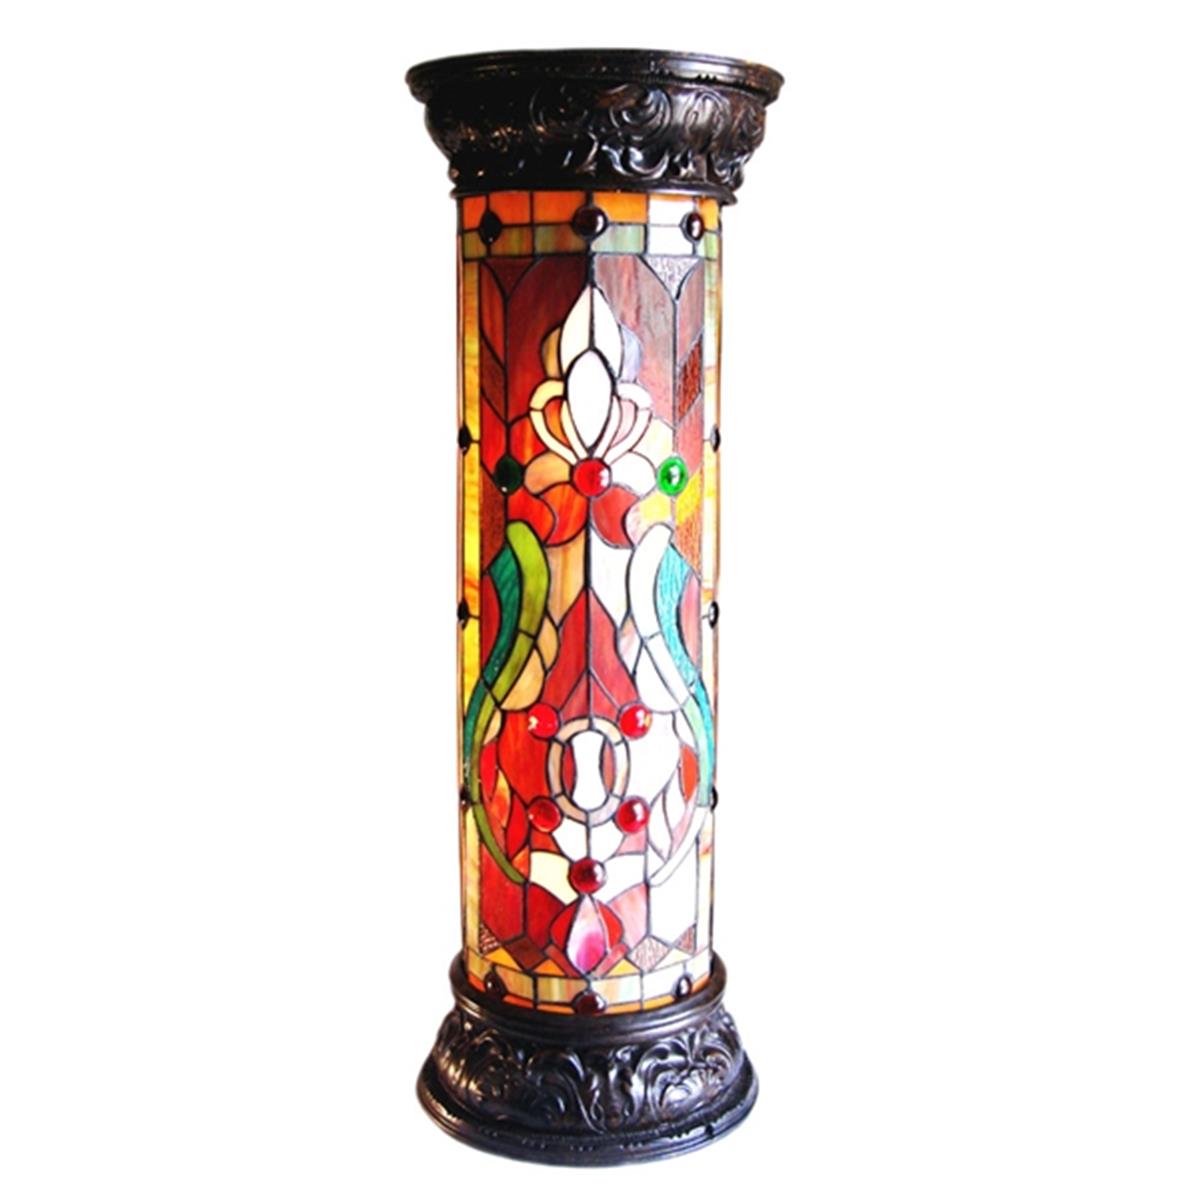 Ch19405rv30-pl2 30 In. Lighting Ruby Spectacle Tiffany Glass 2 Light Victorian Pedestal Light Fixture